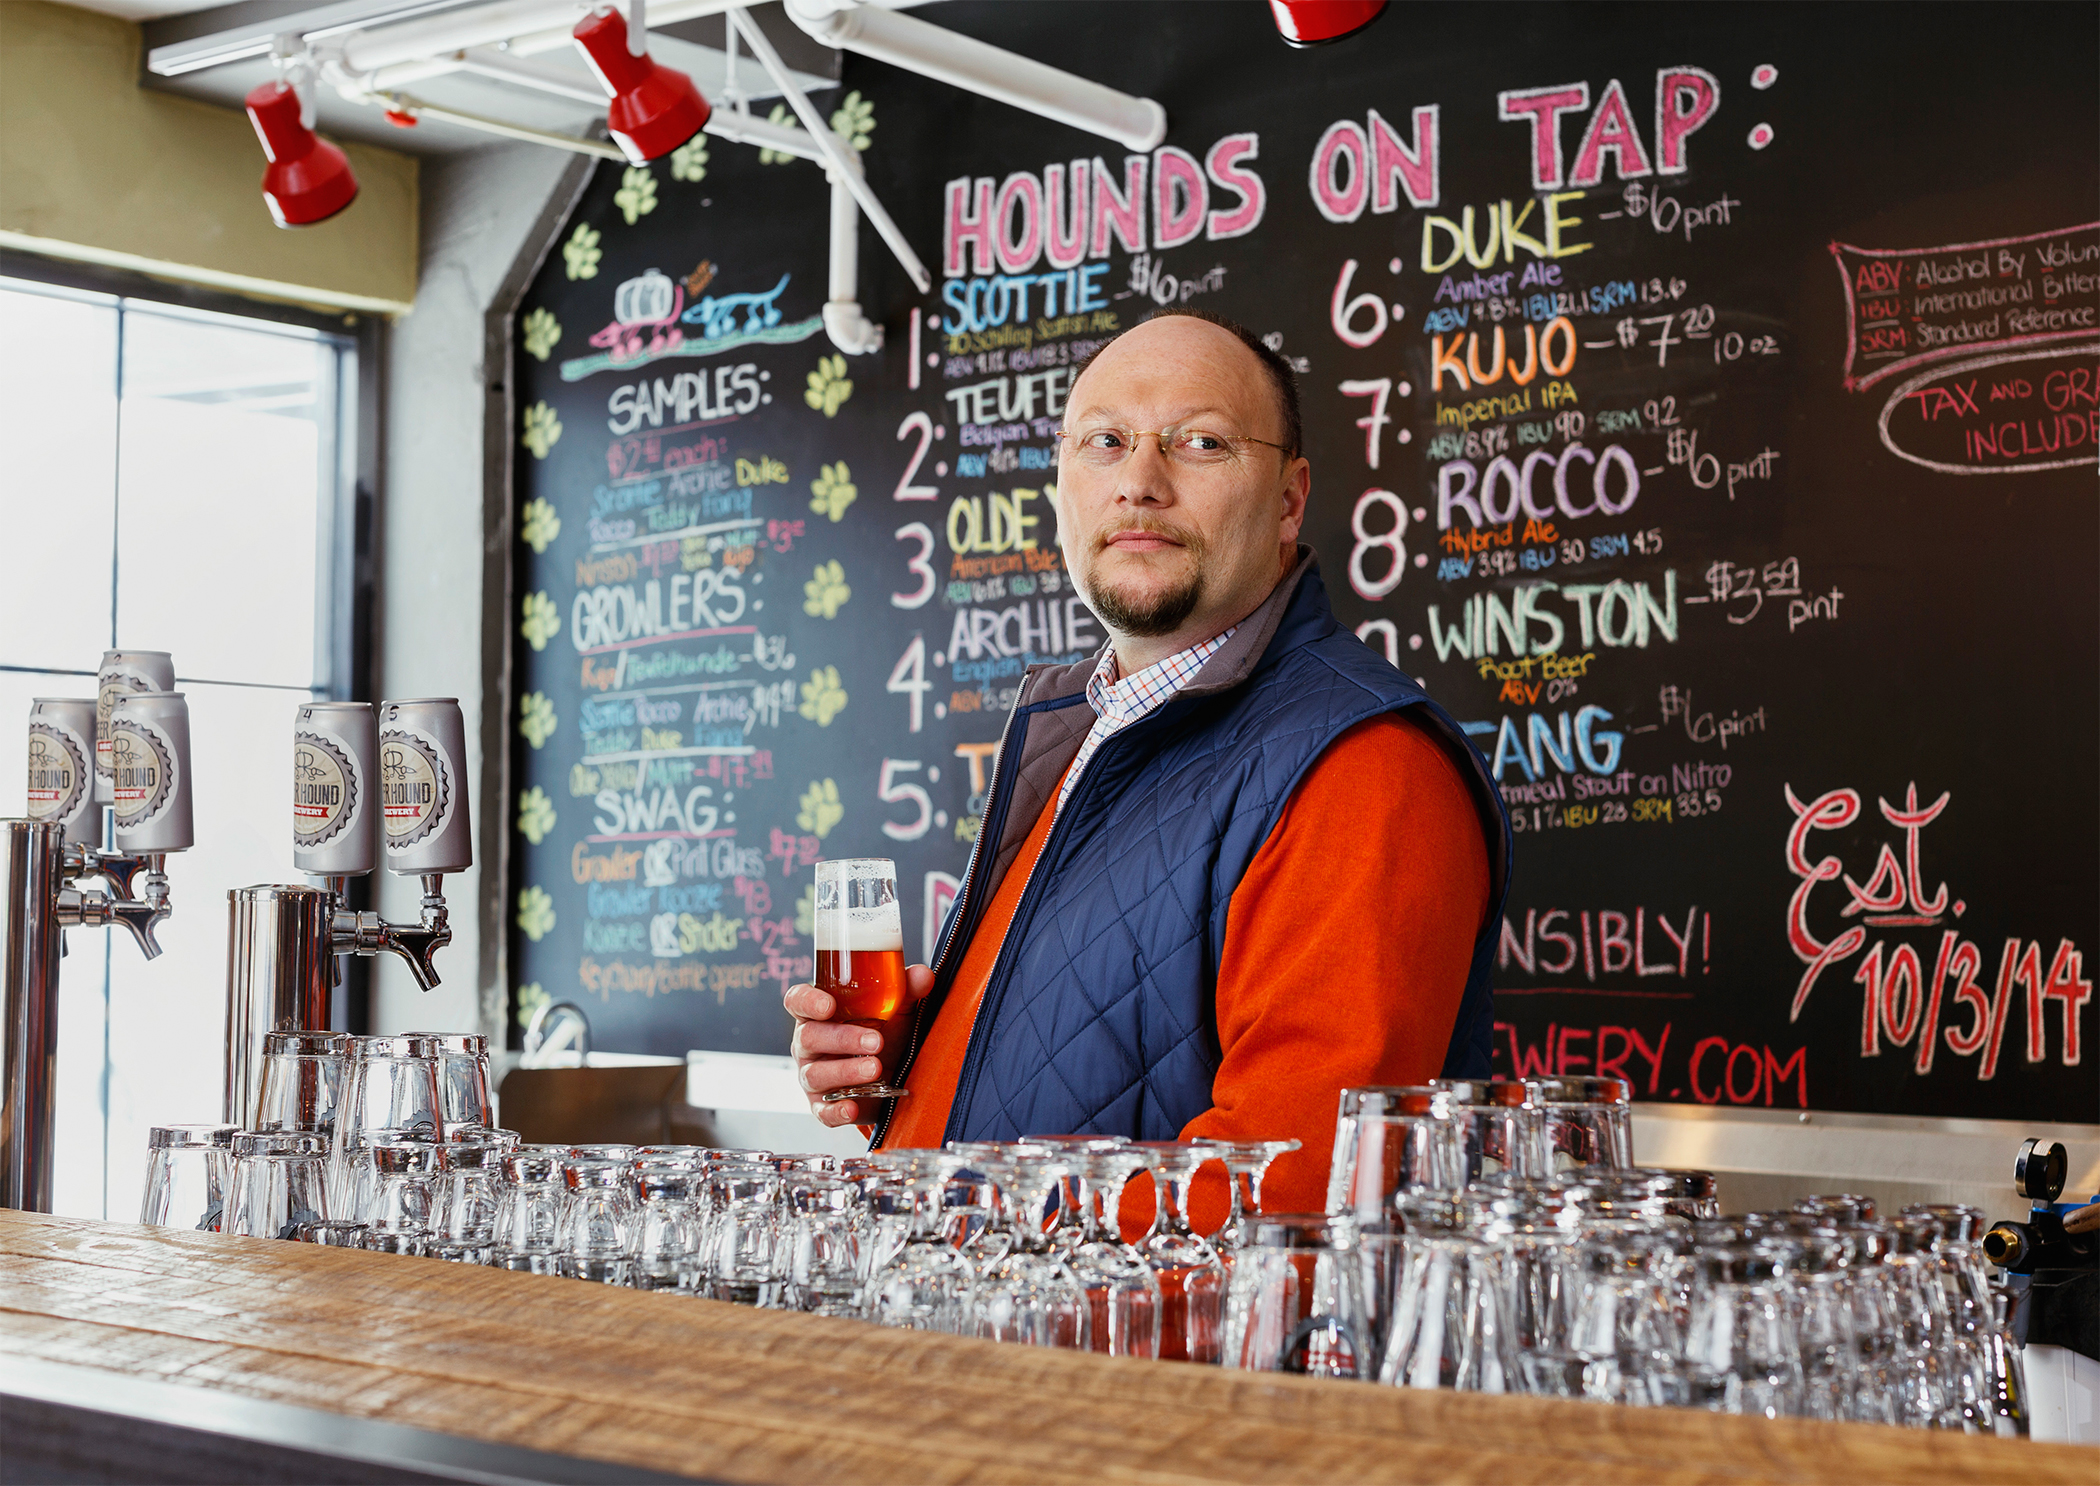 How an Unemployed Construction Worker Became a Craft Beer Entrepreneur